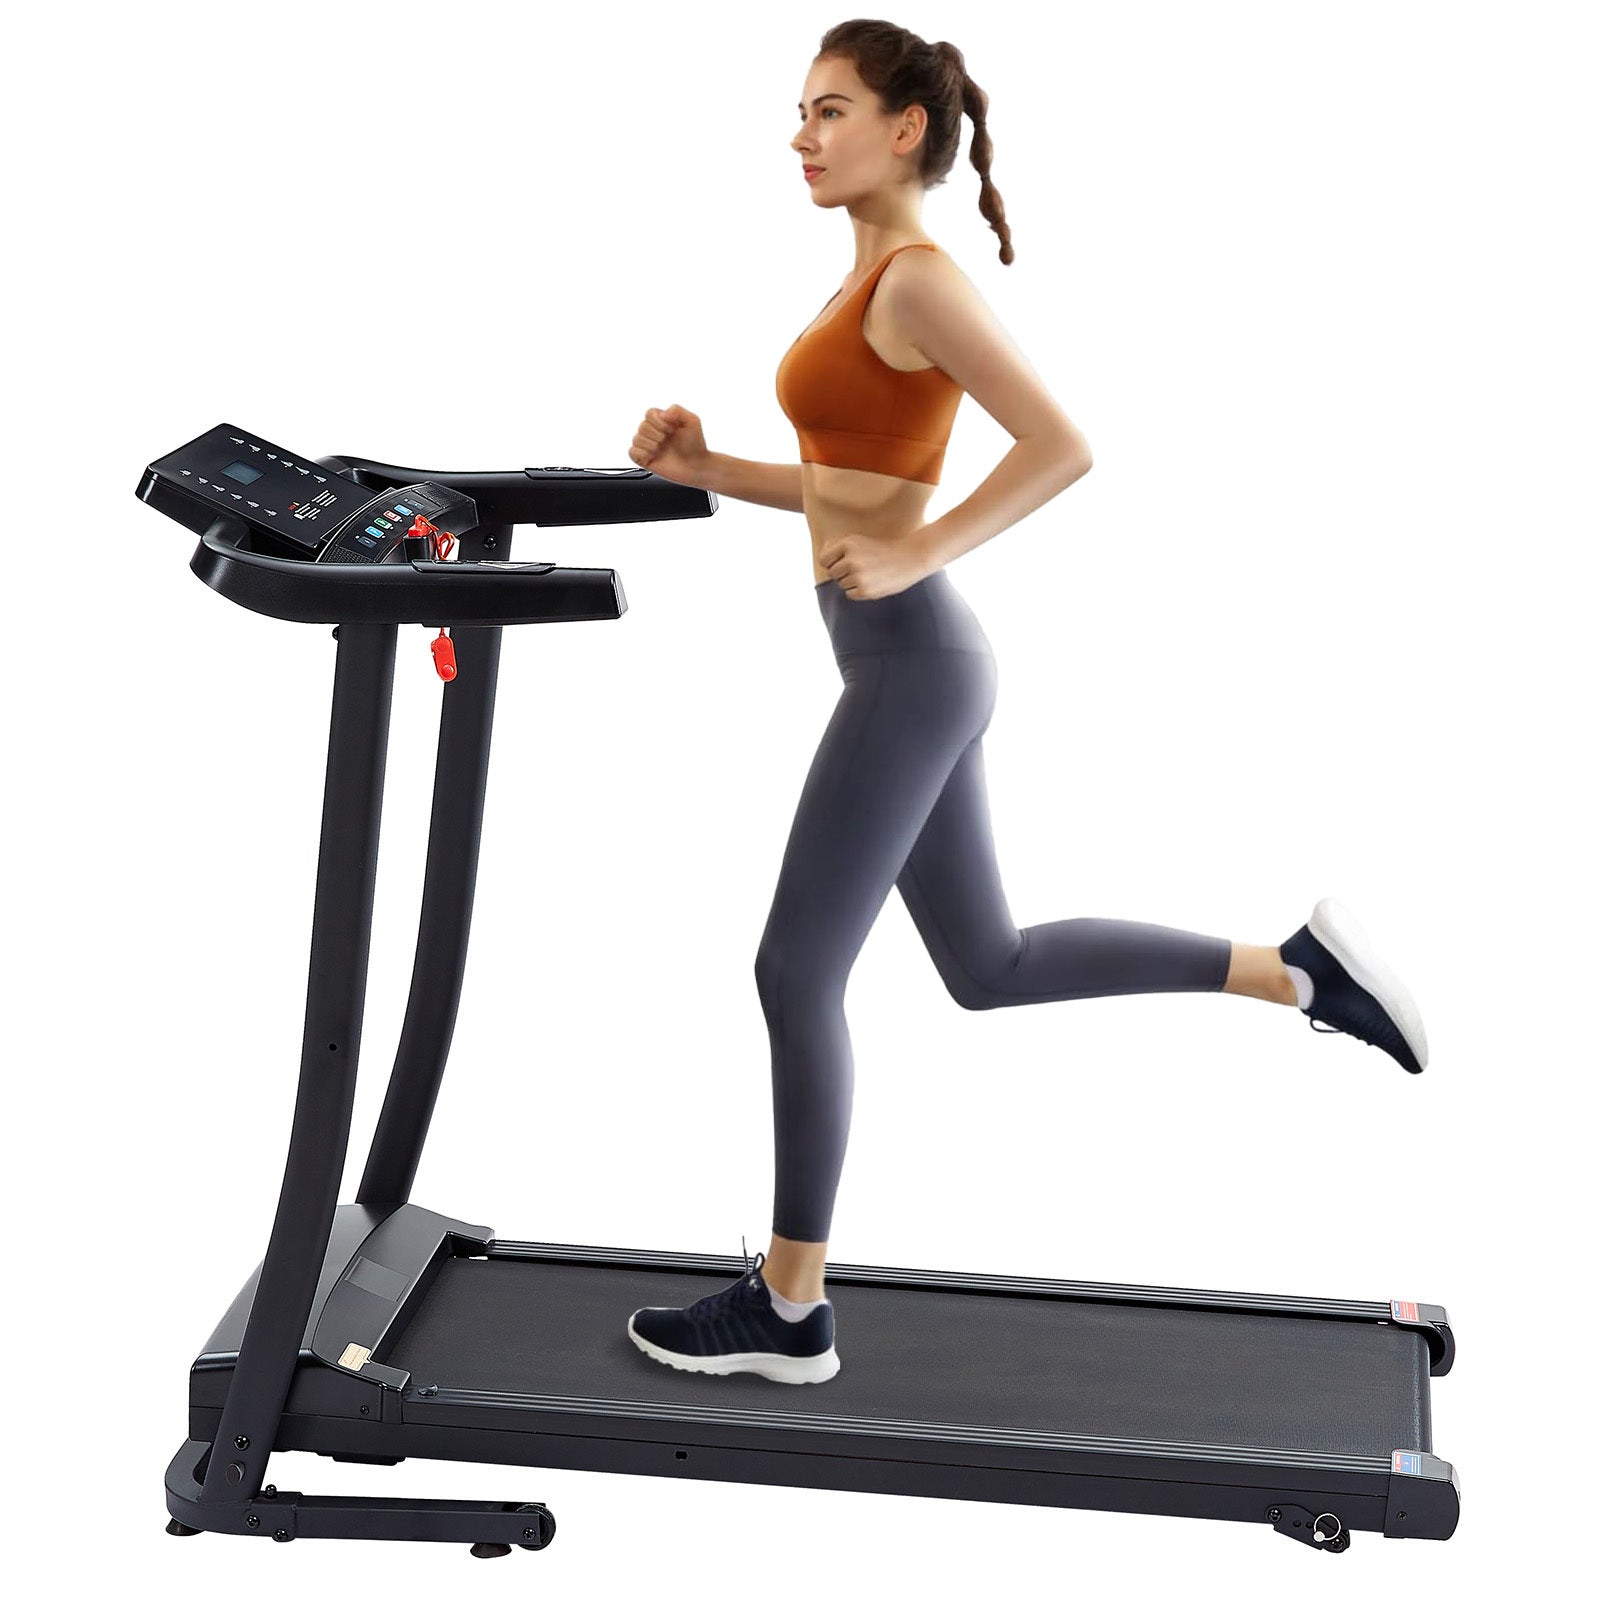 2.5-HP-folding-treadmill,--3-speed-incline-adjustment-and-12-preset-programs,-3-countdown-modes,-heart-rate,-Bluetooth-Exercise-&-Fitness